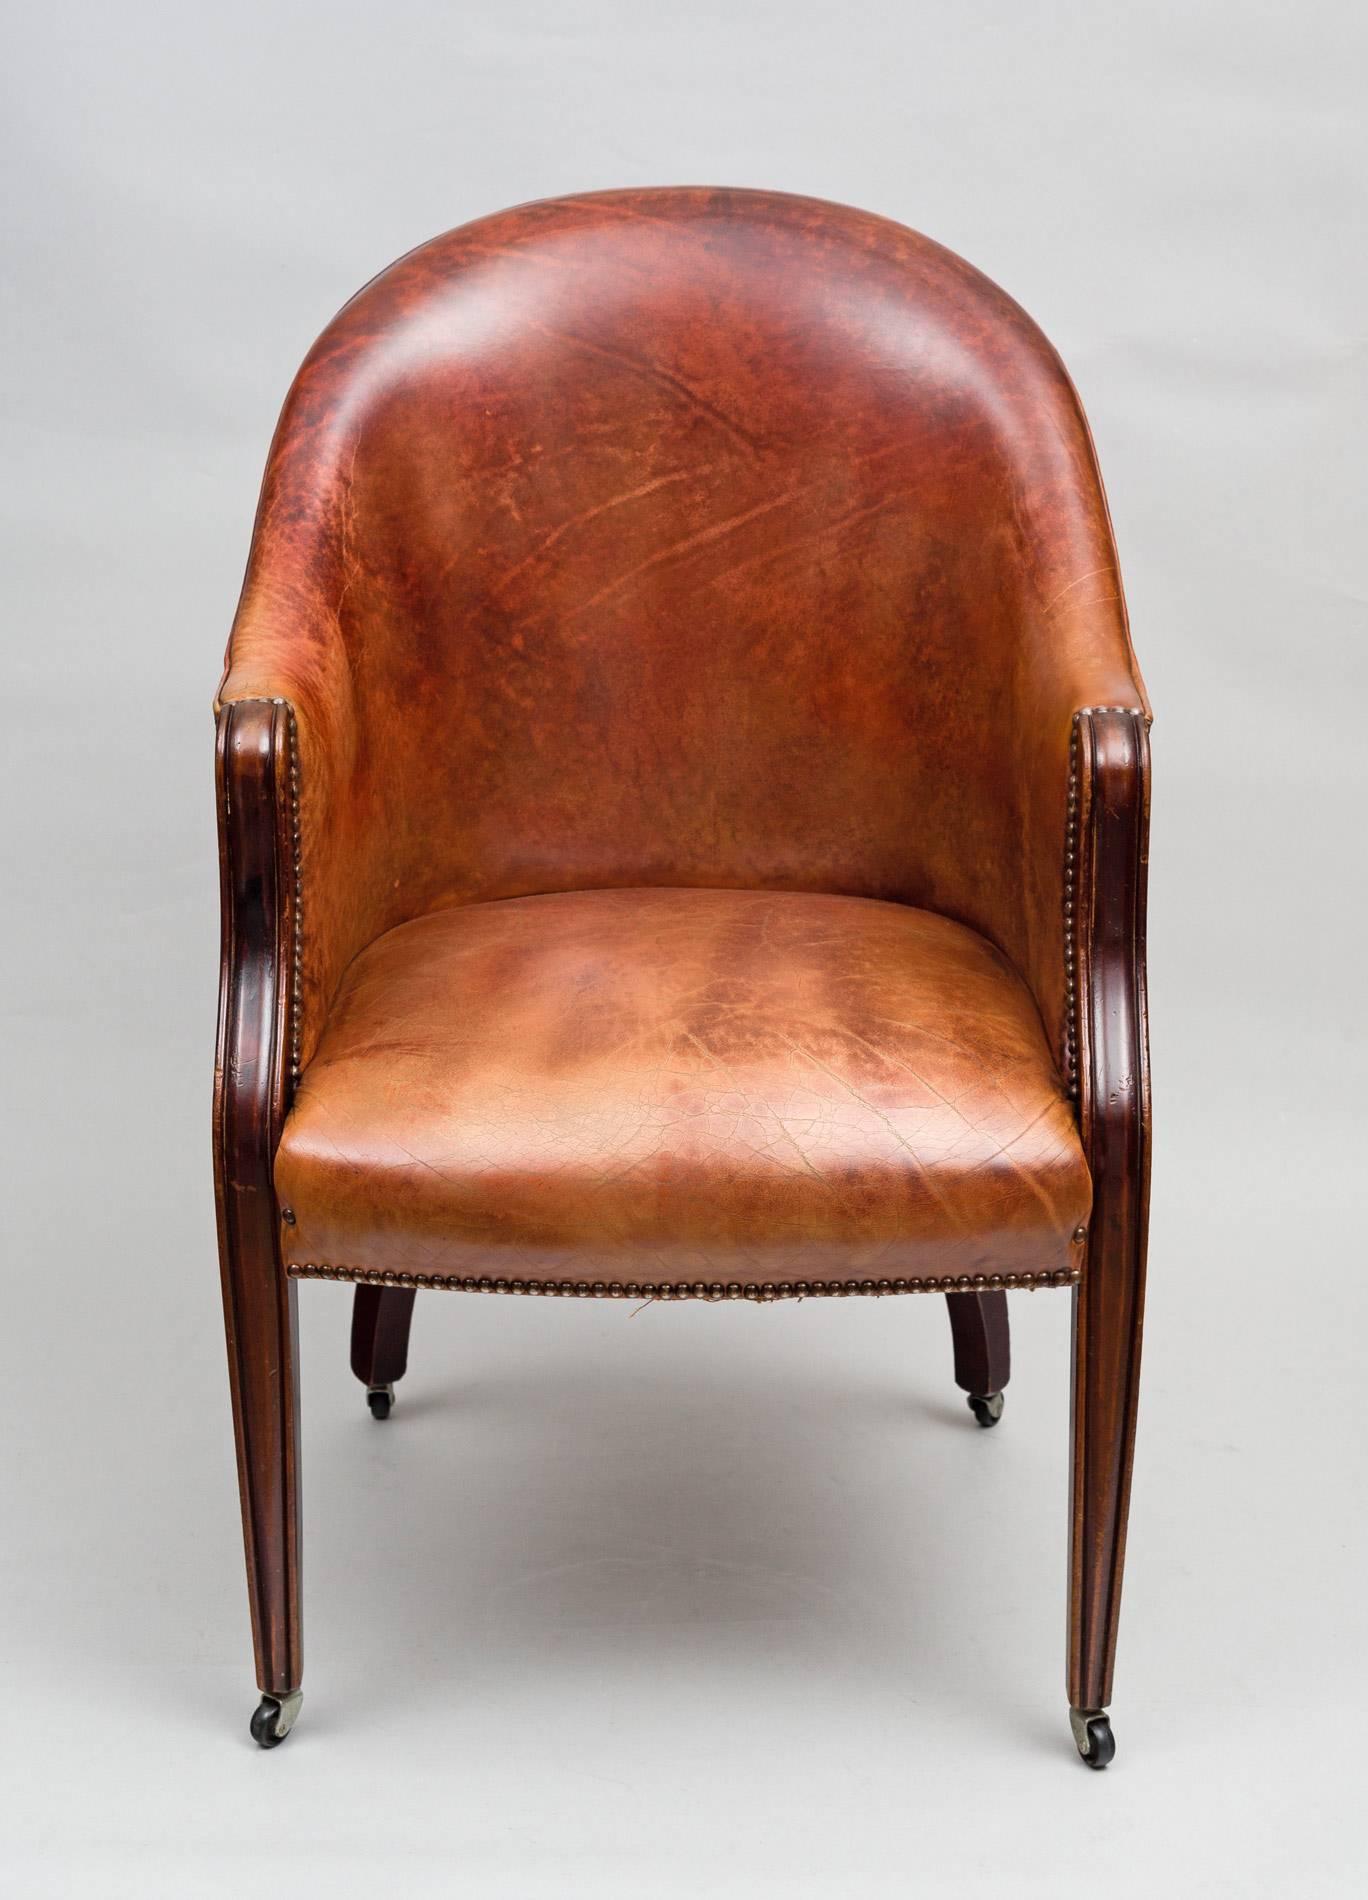 An Edwardian mahogany framed tub chair upholstered in a reddish-brown colored leather with silvered nail heads, a wrap around back with square molded tapering front legs and out-turned back legs on casters.

    

 
 
 
 

